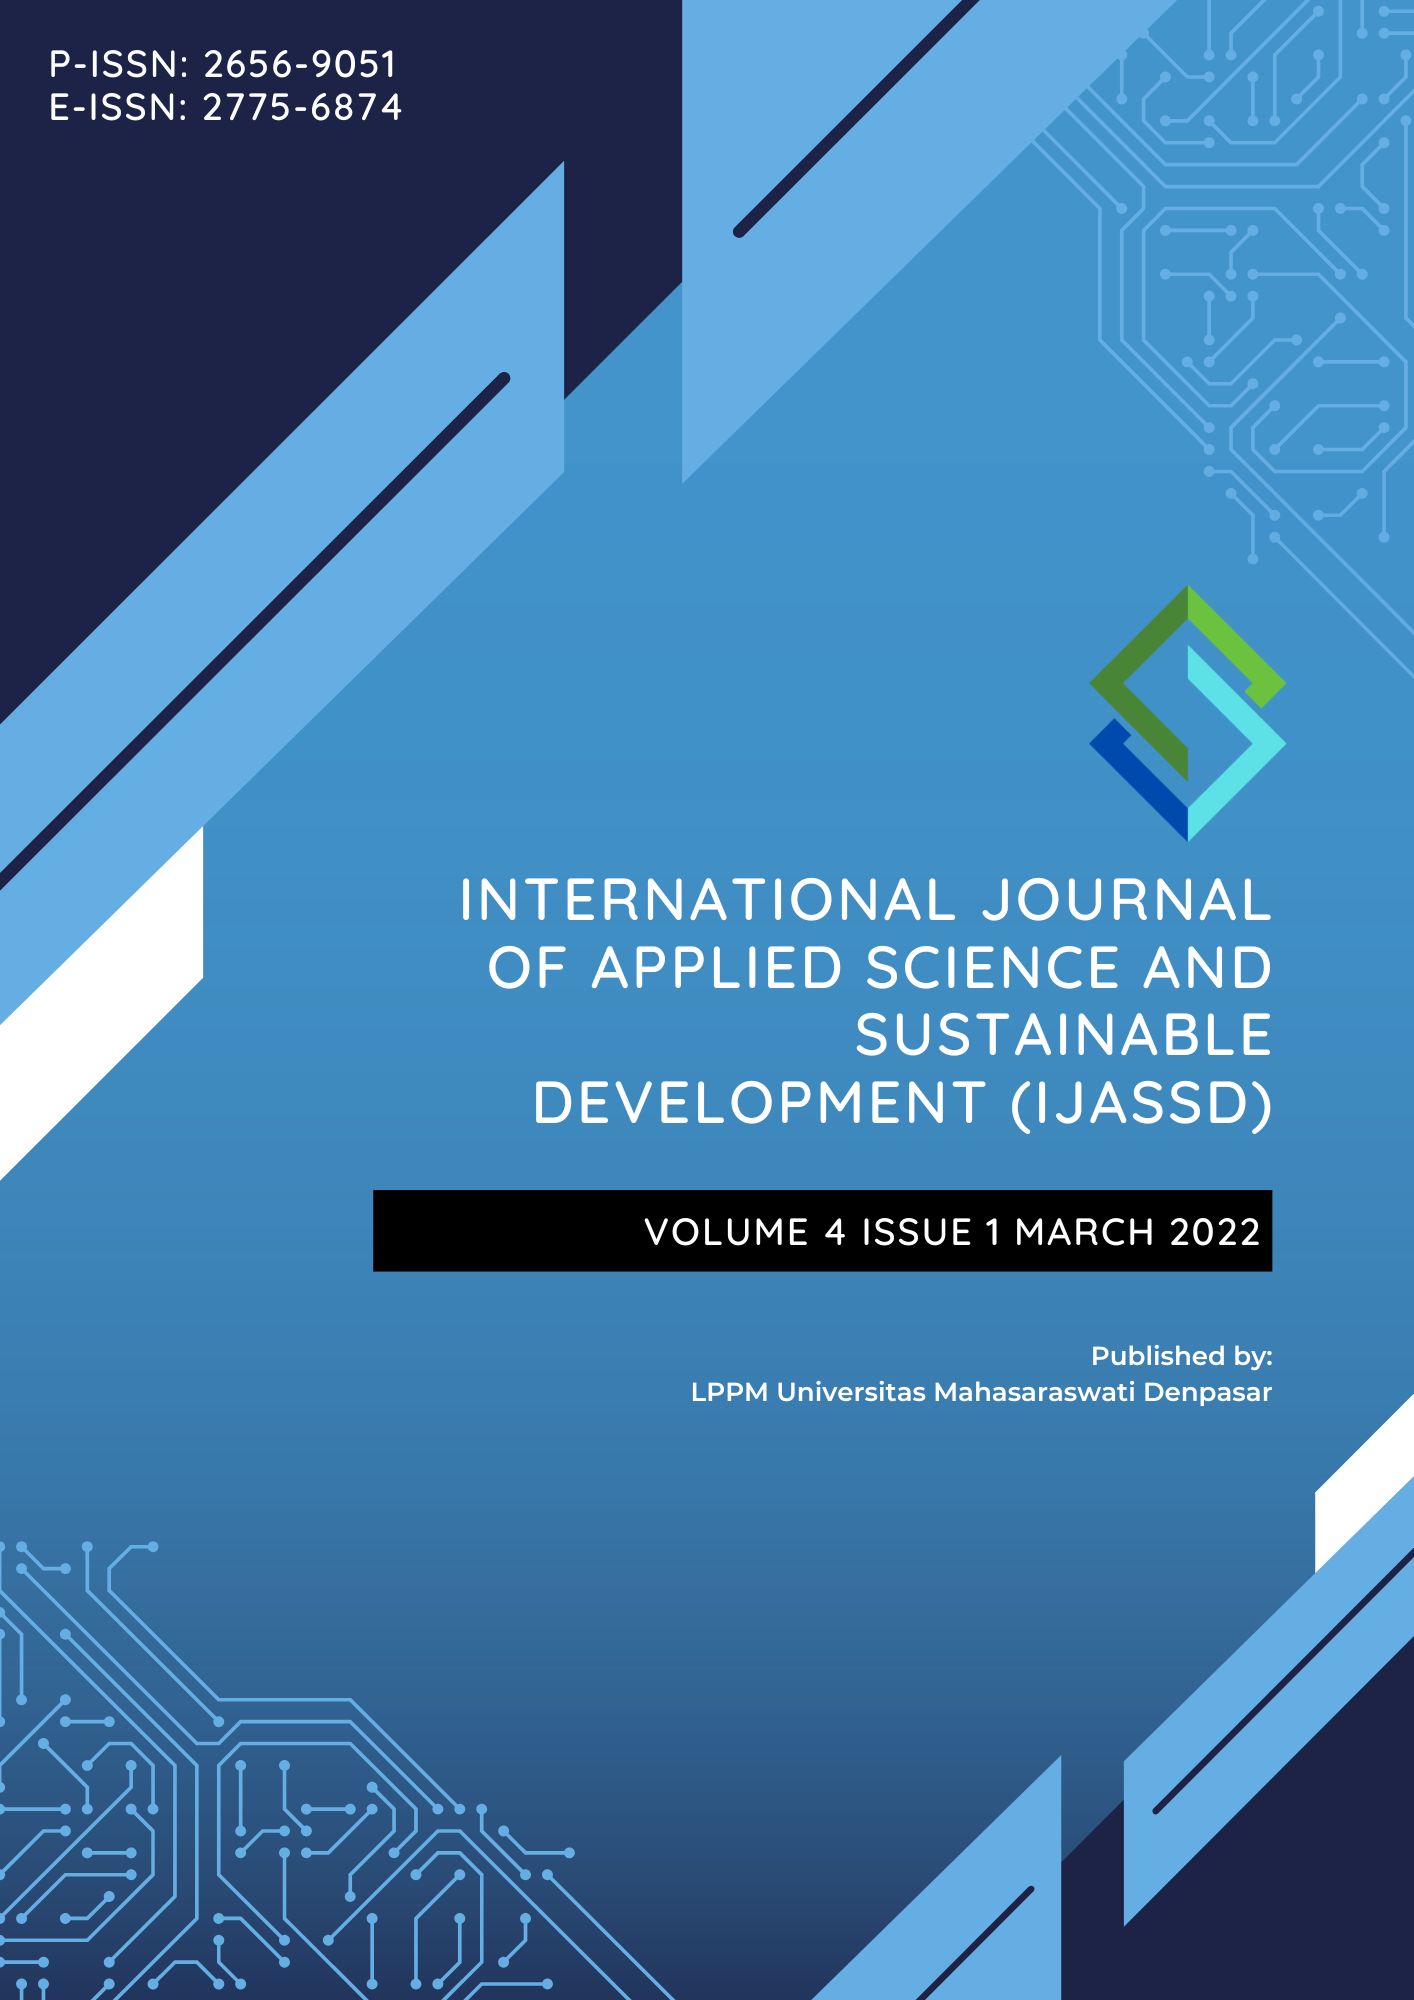 					View Vol. 4 No. 2 (2022): International Journal of Applied Science and Sustainable Development (IJASSD)
				